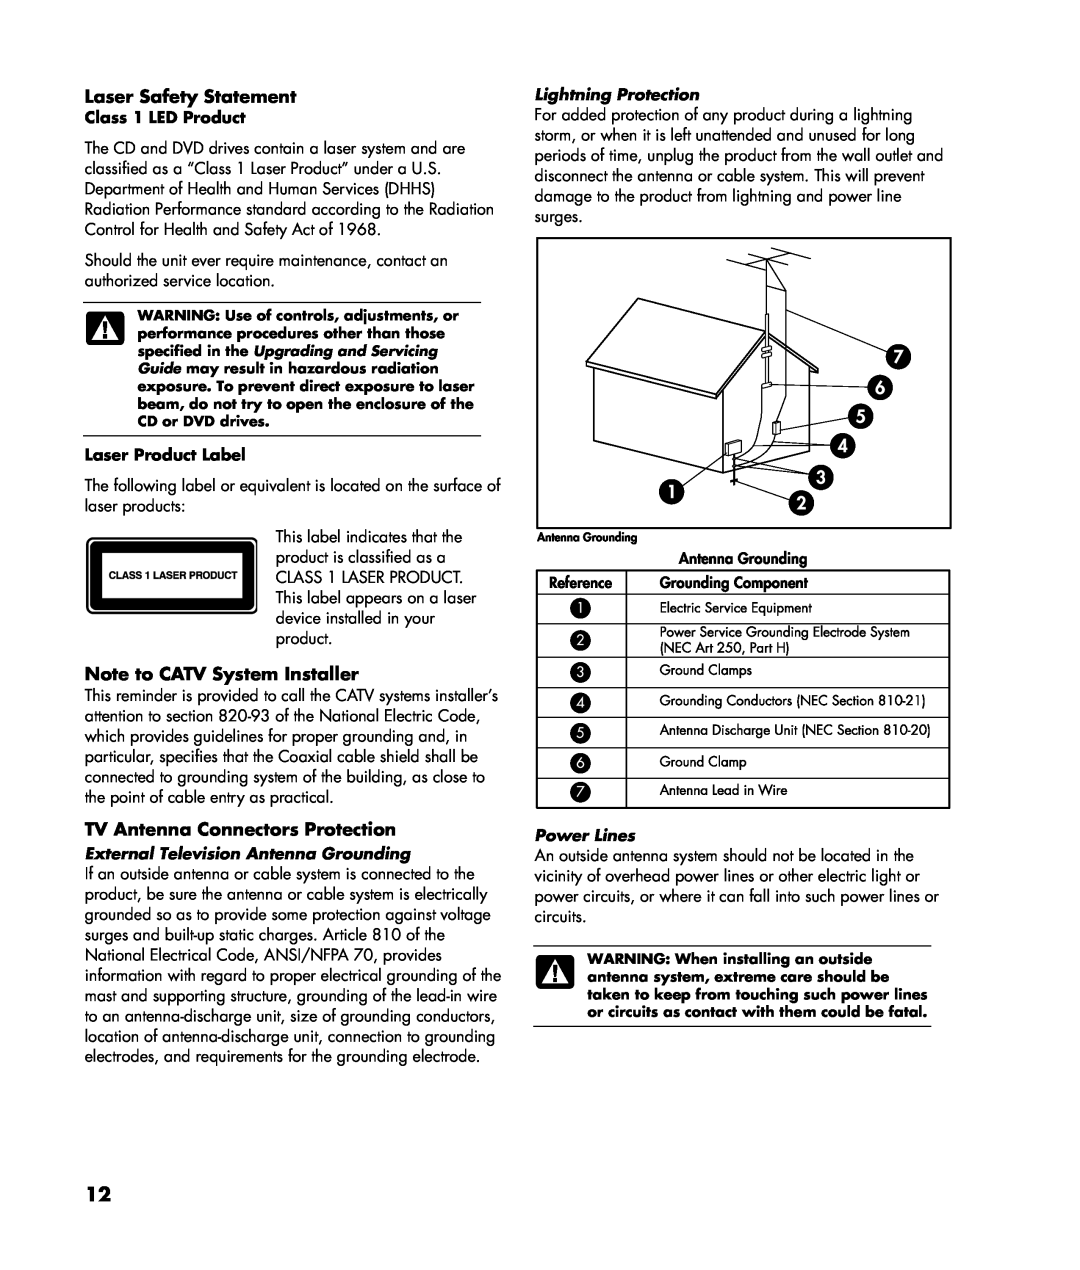 HP SR2038X Laser Safety Statement, Note to CATV System Installer, TV Antenna Connectors Protection, Lightning Protection 